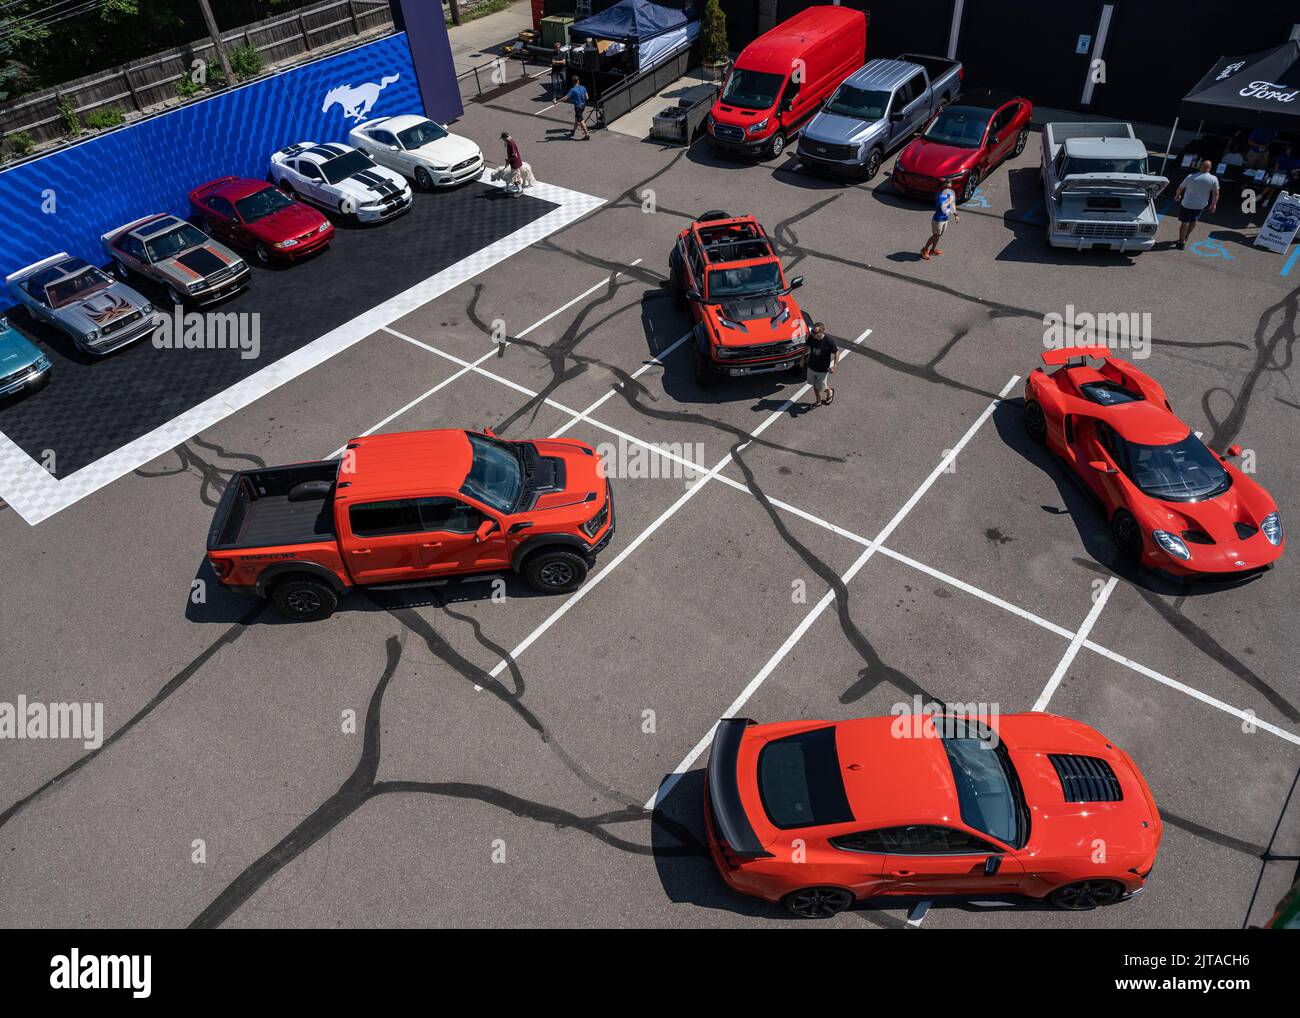 ROYAL OAK, MI/USA - AUGUST 19, 2022: Aerial view of the Ford exhibit (F-150, Bronco, GT, Mustang) on the Woodward Dream Cruise route. Stock Photo